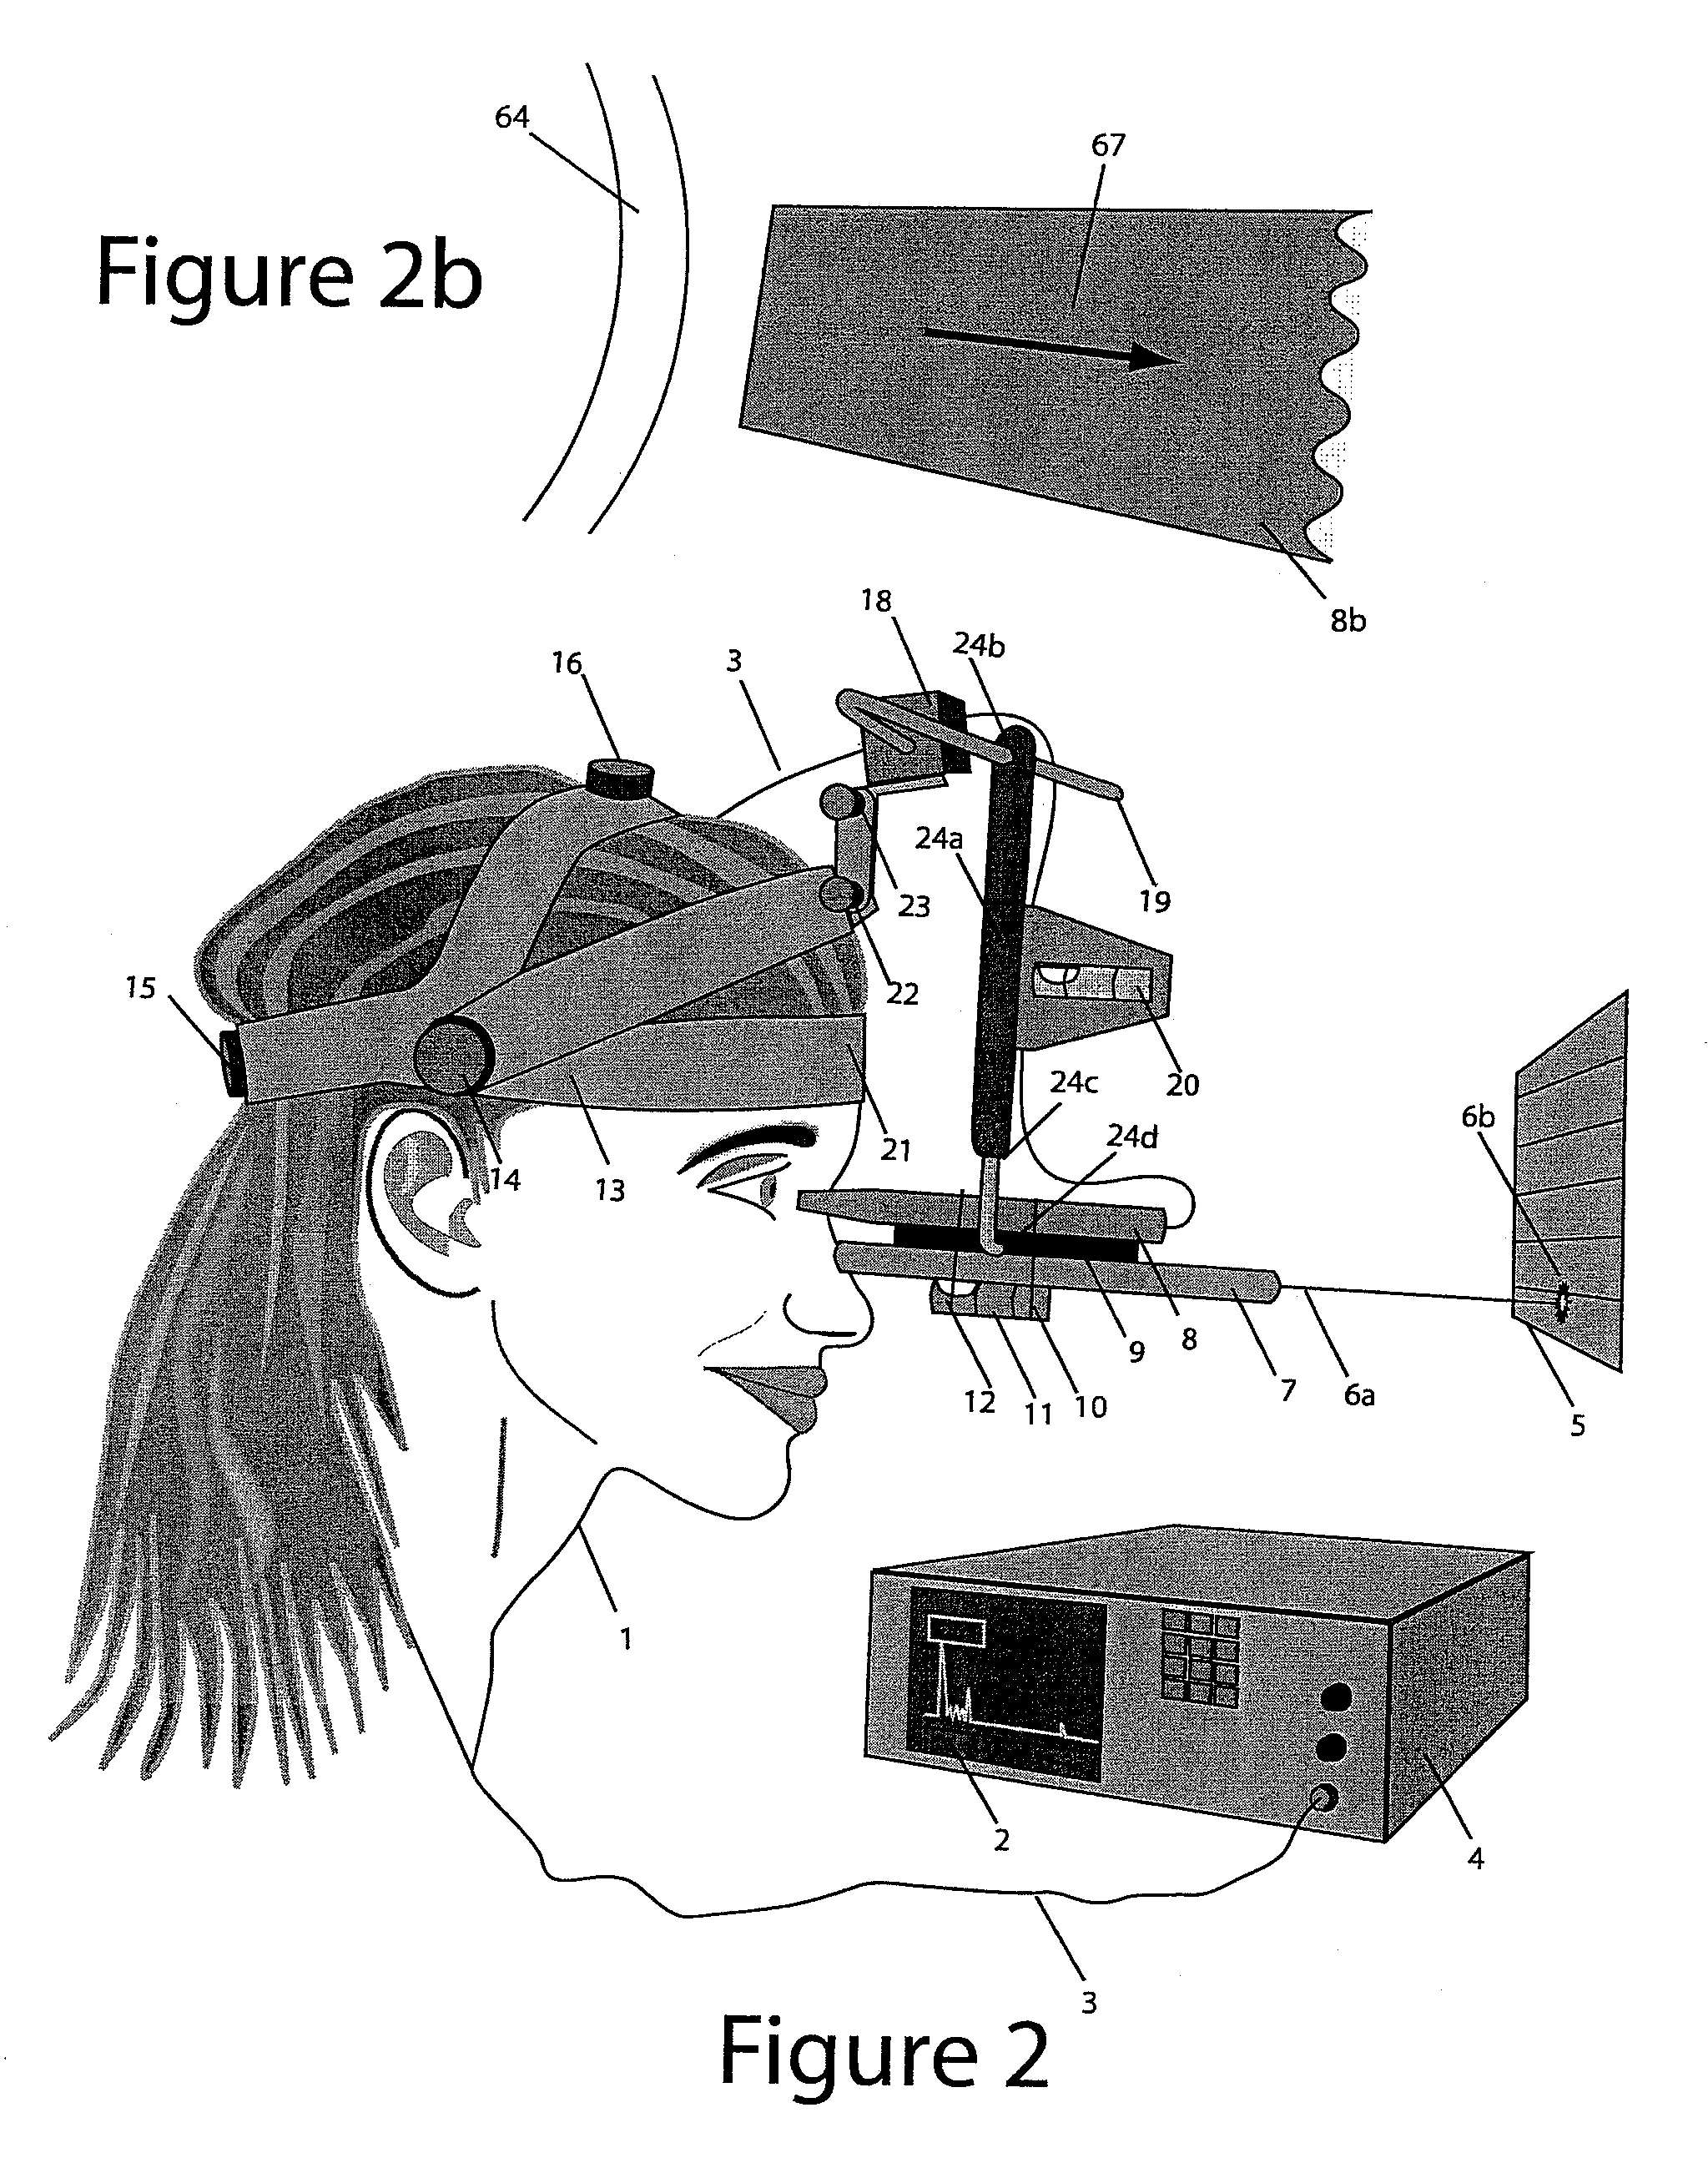 Laser guided eye measuring device and method for using